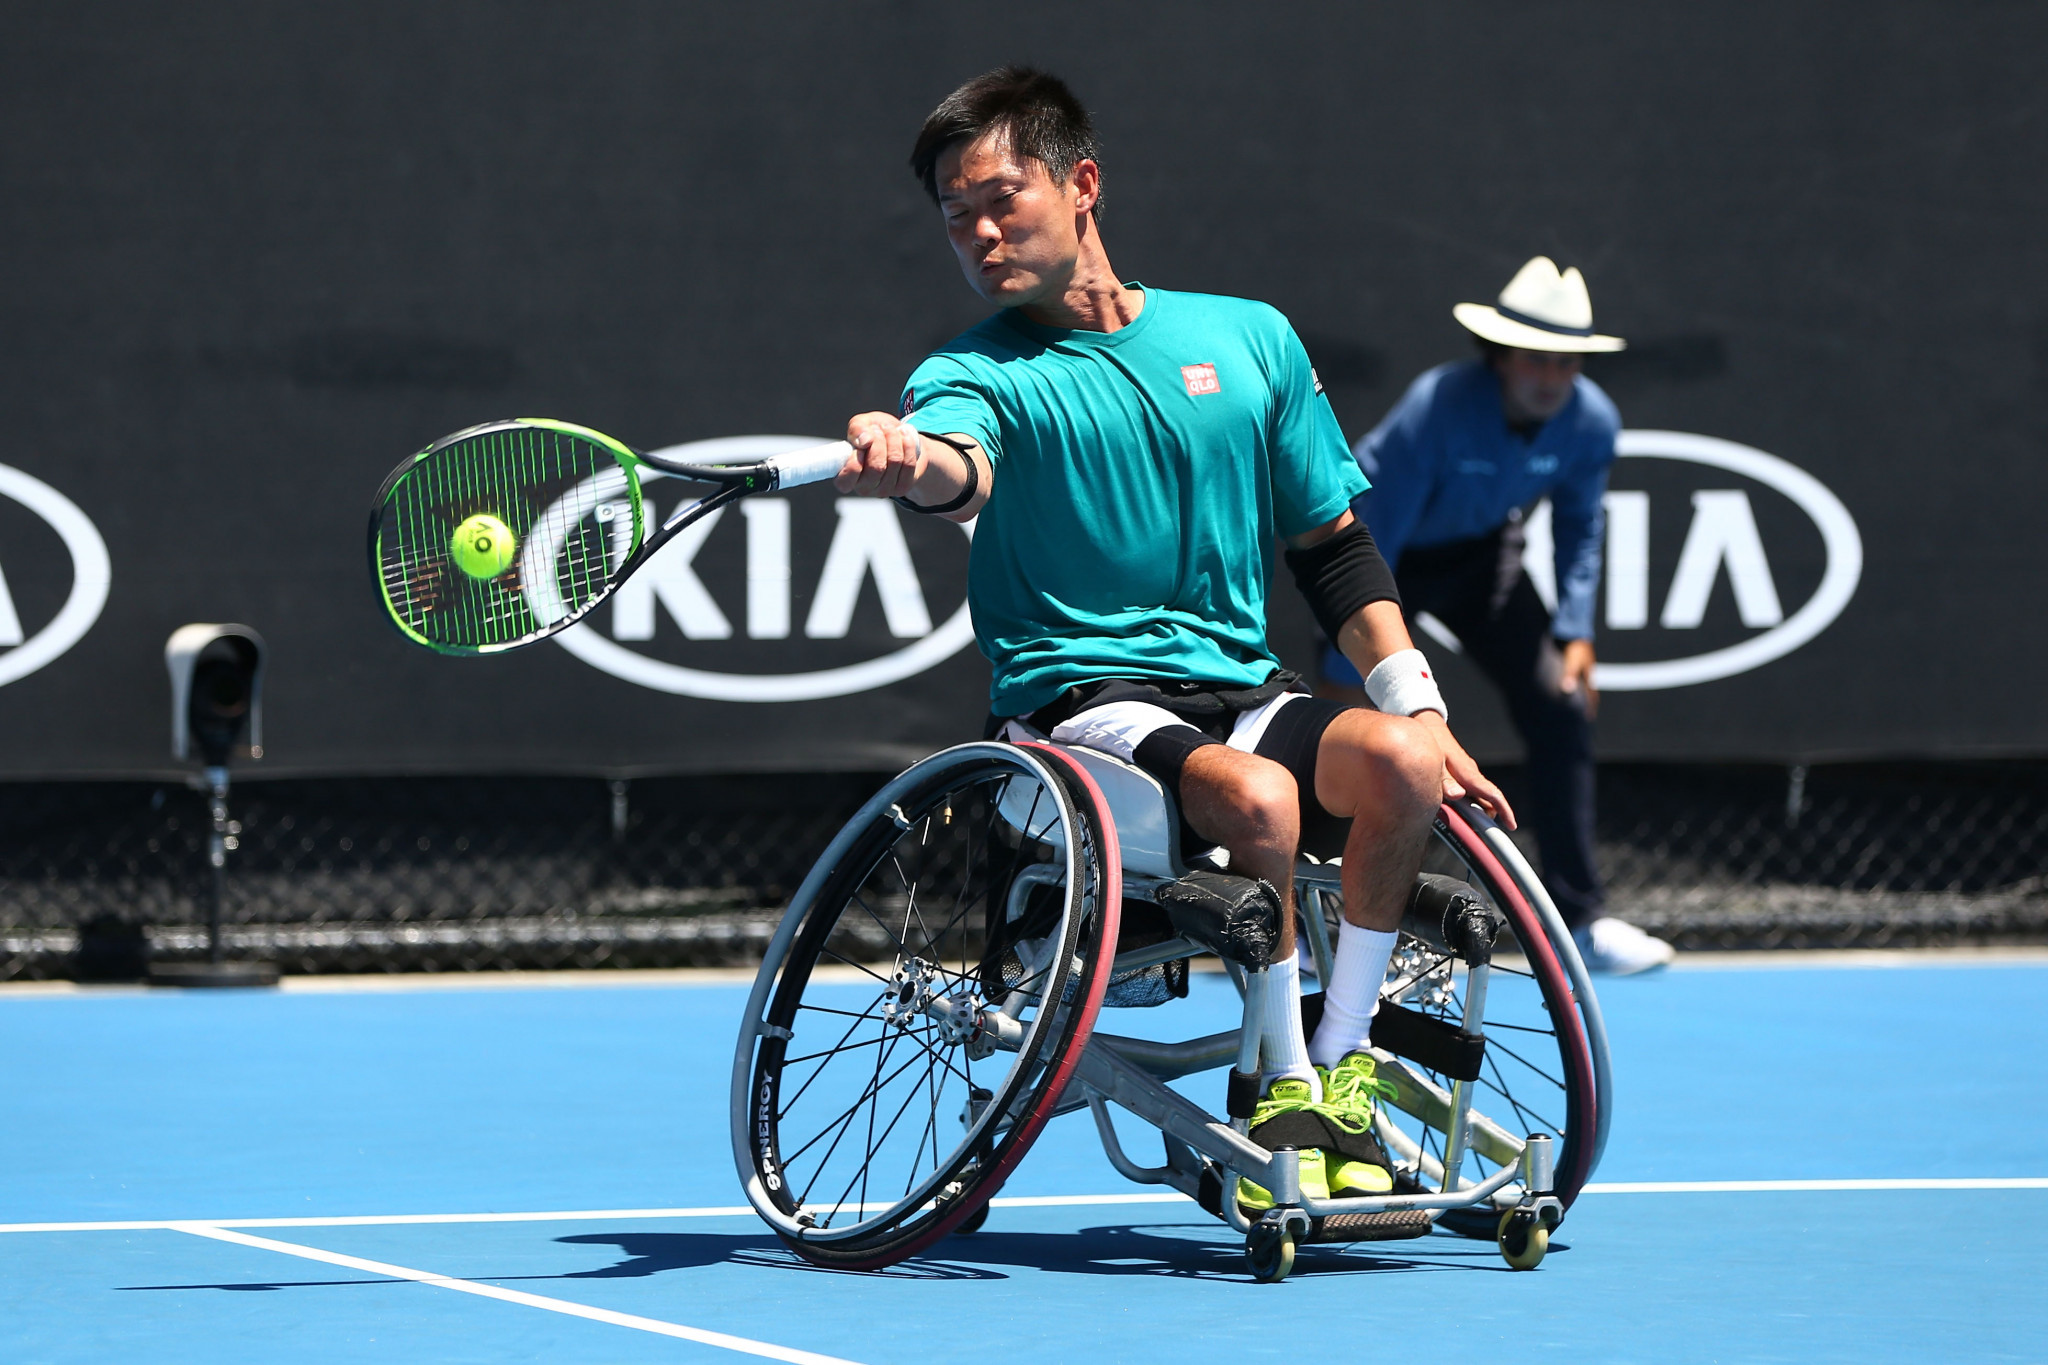 Kunieda and Fernandez ease into French Open wheelchair draw semis